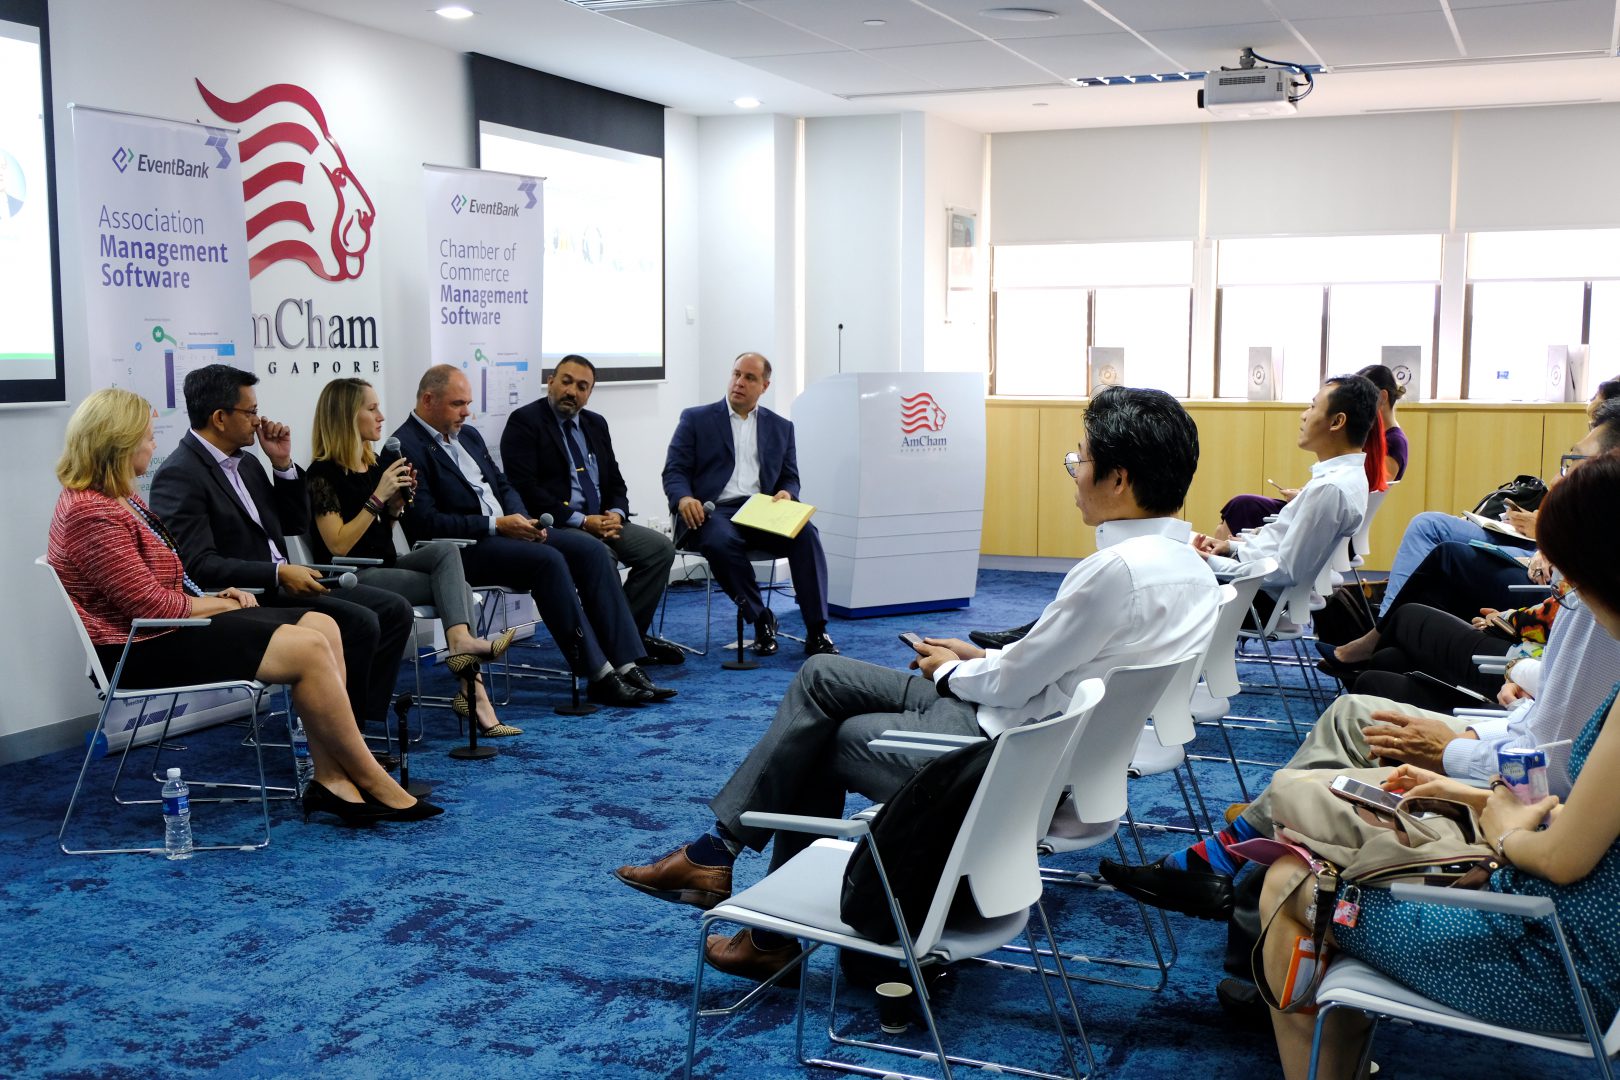 Best Practices in Membership Management – Panel discussion in Singapore (Photos)